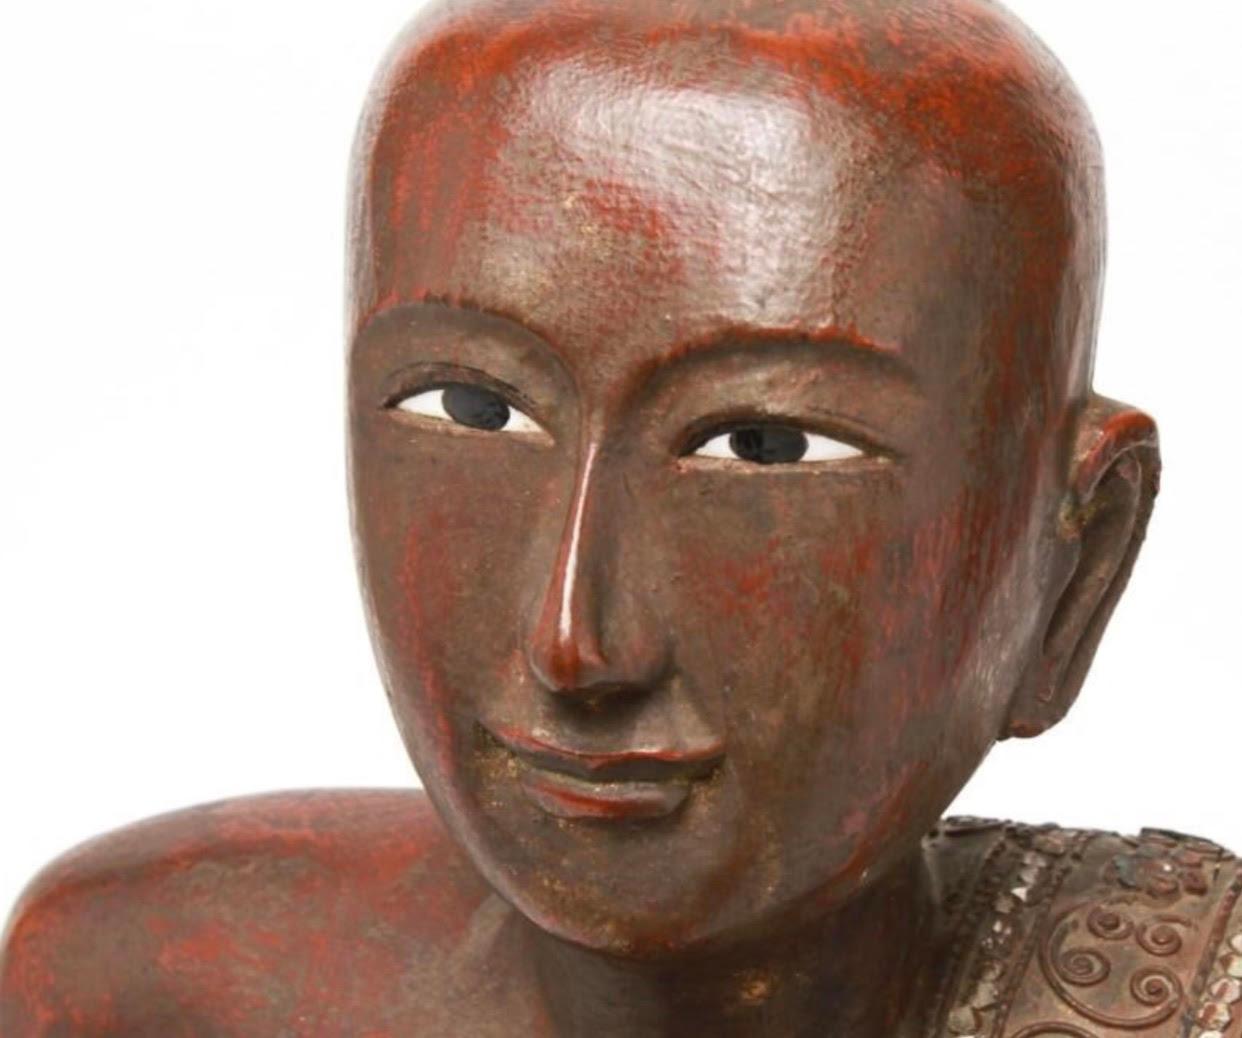 Burmese hand carved wood statue of a Buddhist monk, with traces of gilt and red lacquer. Made in the 20th century. The figure has enameled eyes fixed in an intense yet spiritual upward enigmatic gaze. The monk’s attire is detailed with glass